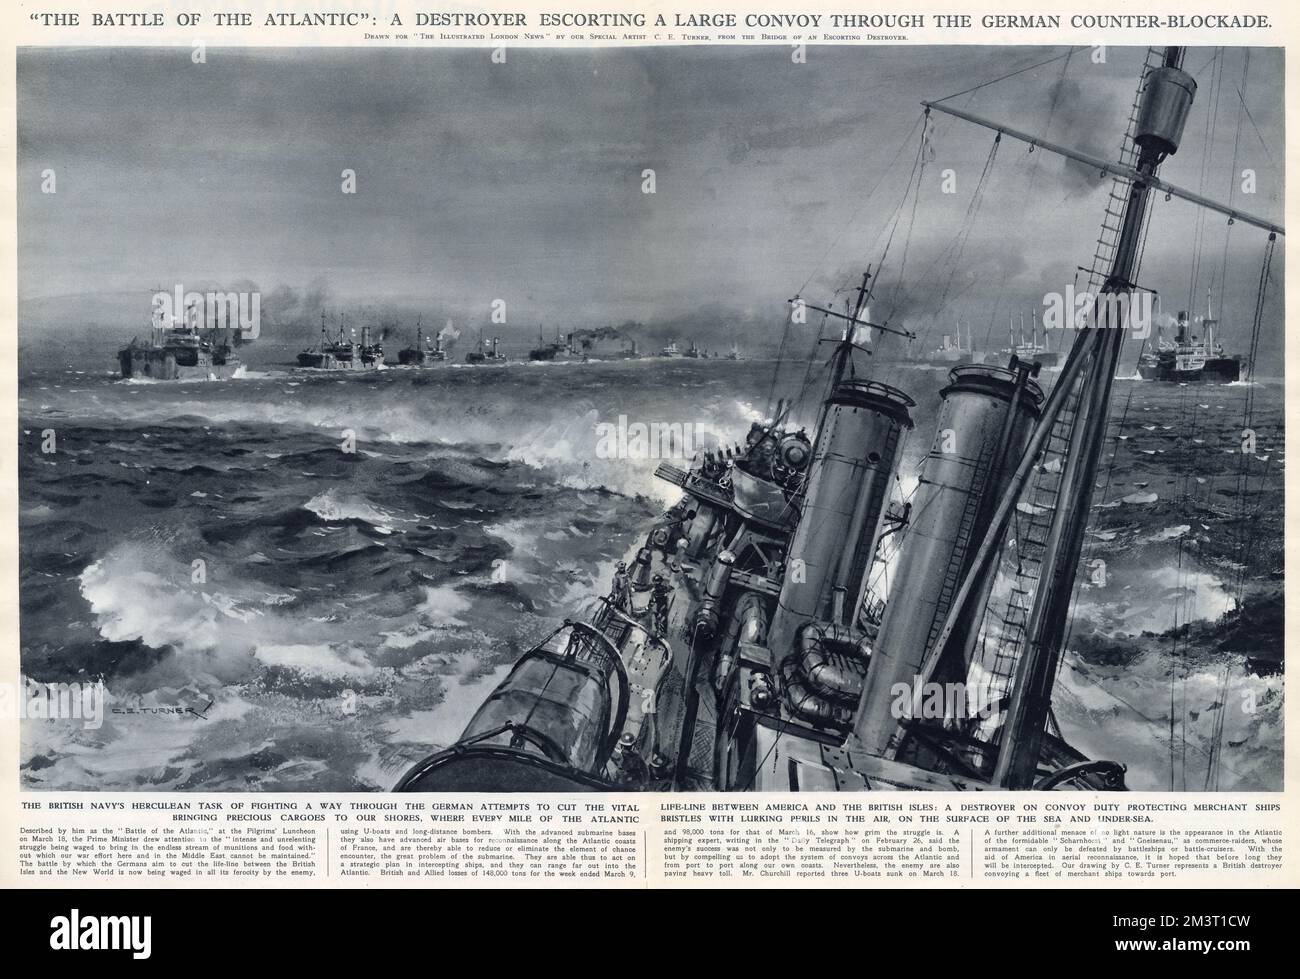 WW2 - A Royal Navy Destroyer escorting a large convoy through the German counter-blockade - 'The Battle of the Atlantic'.     Date: 1941 Stock Photo